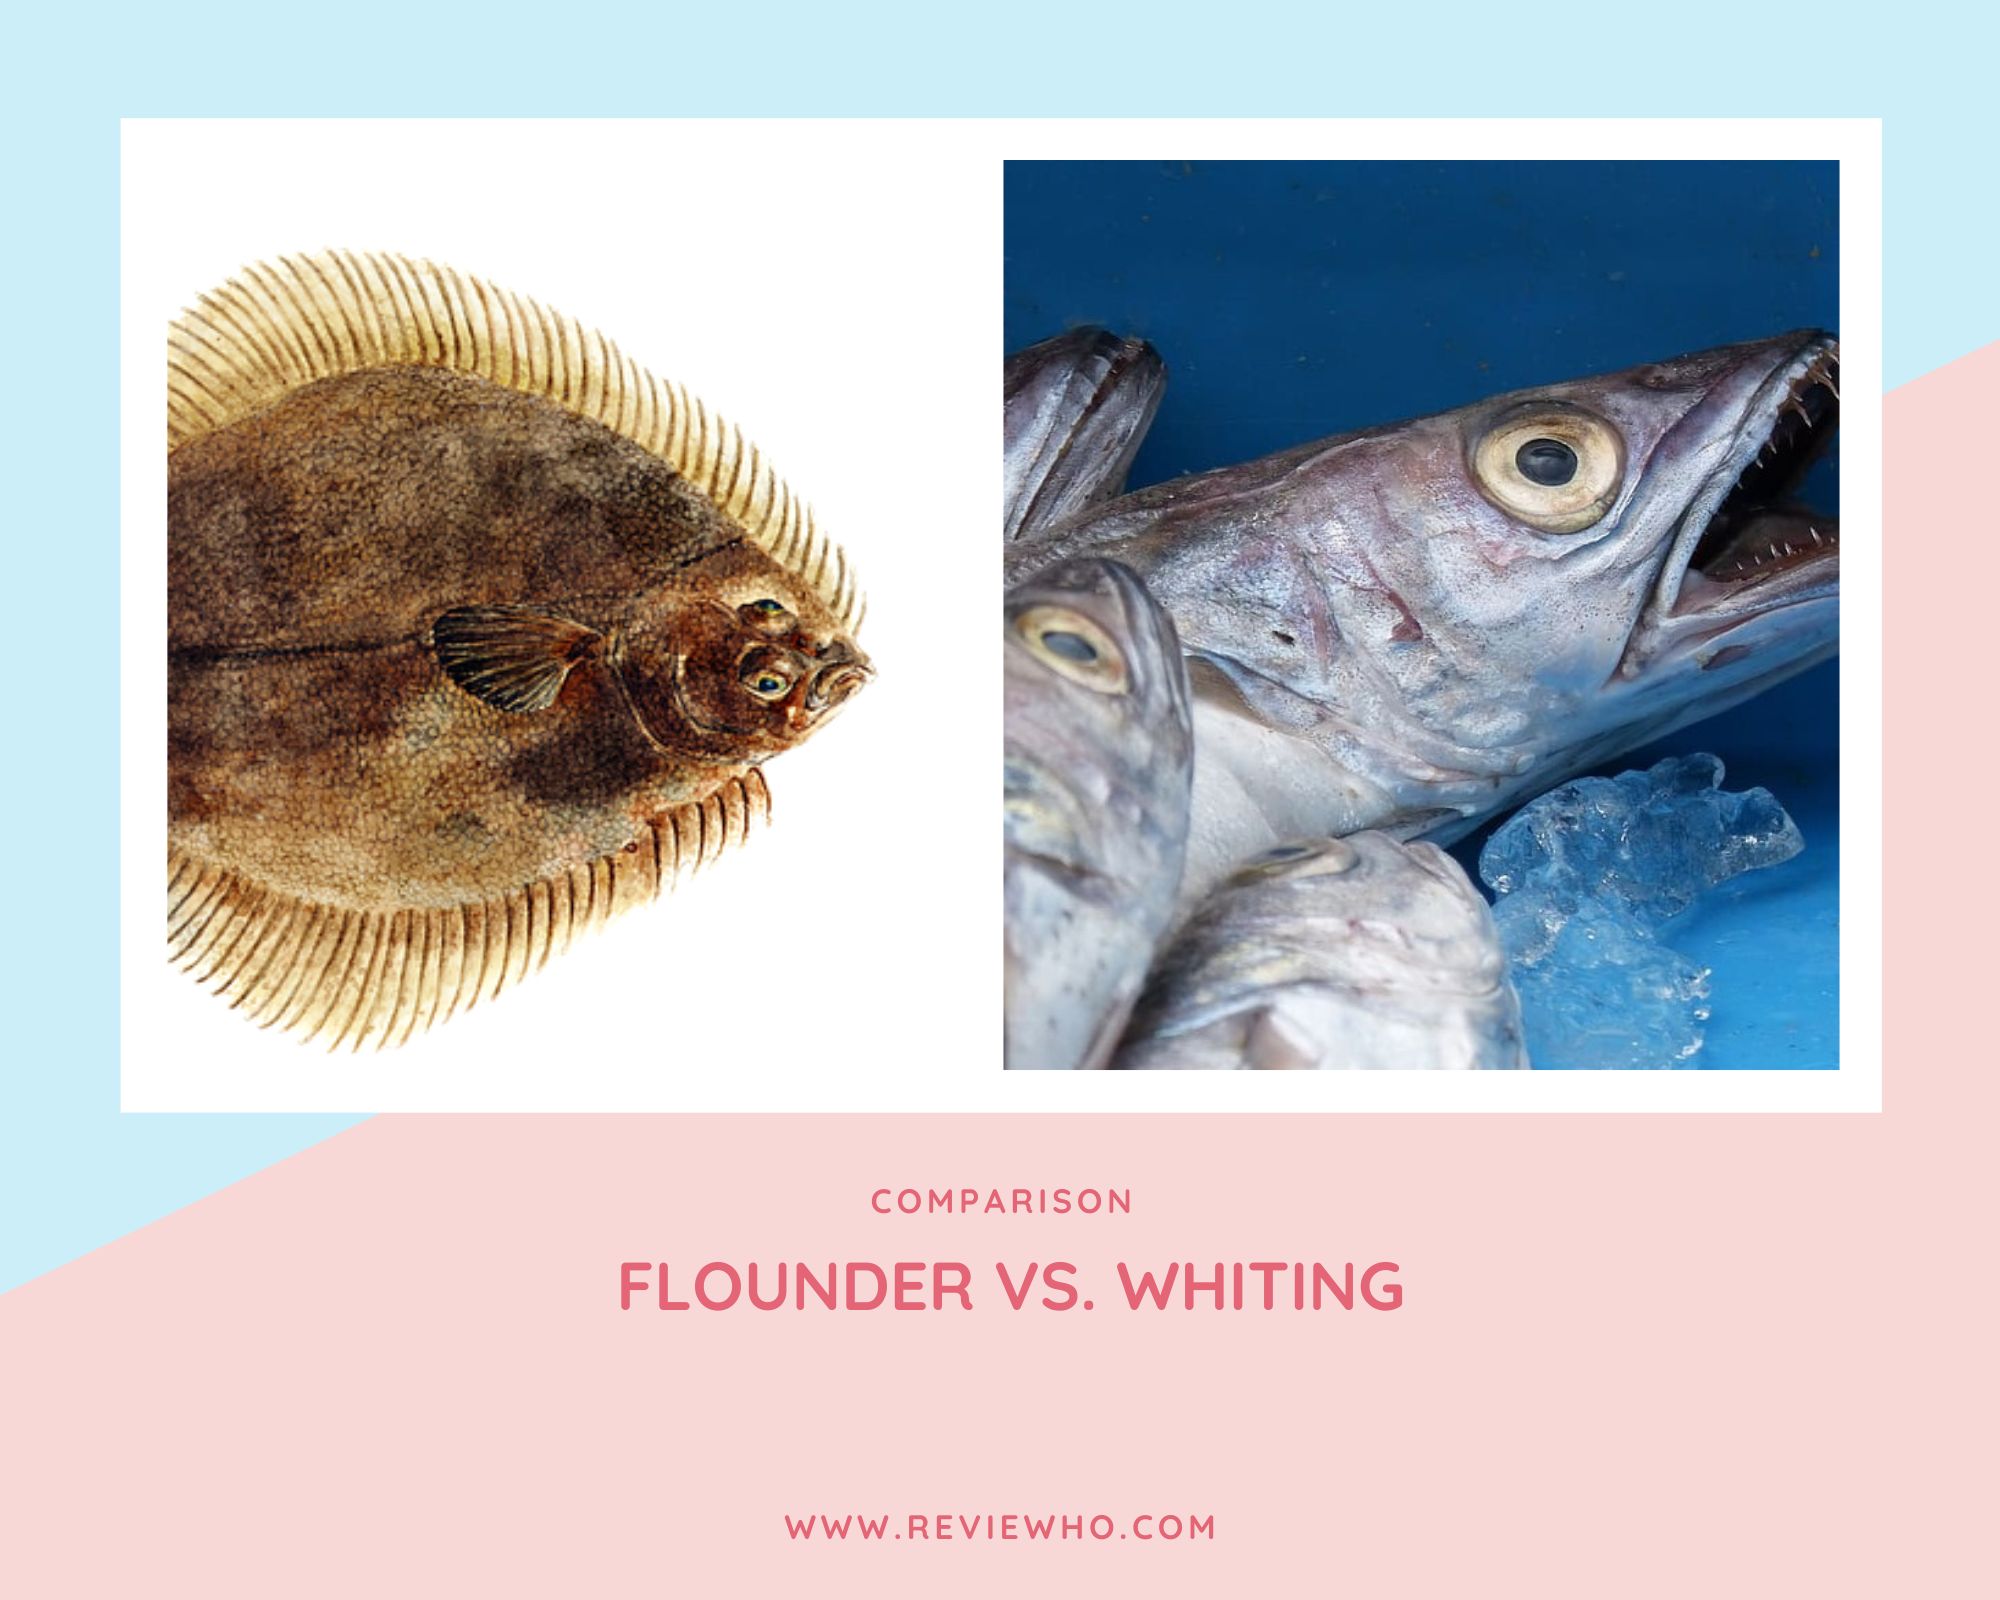 Flounder and Whiting